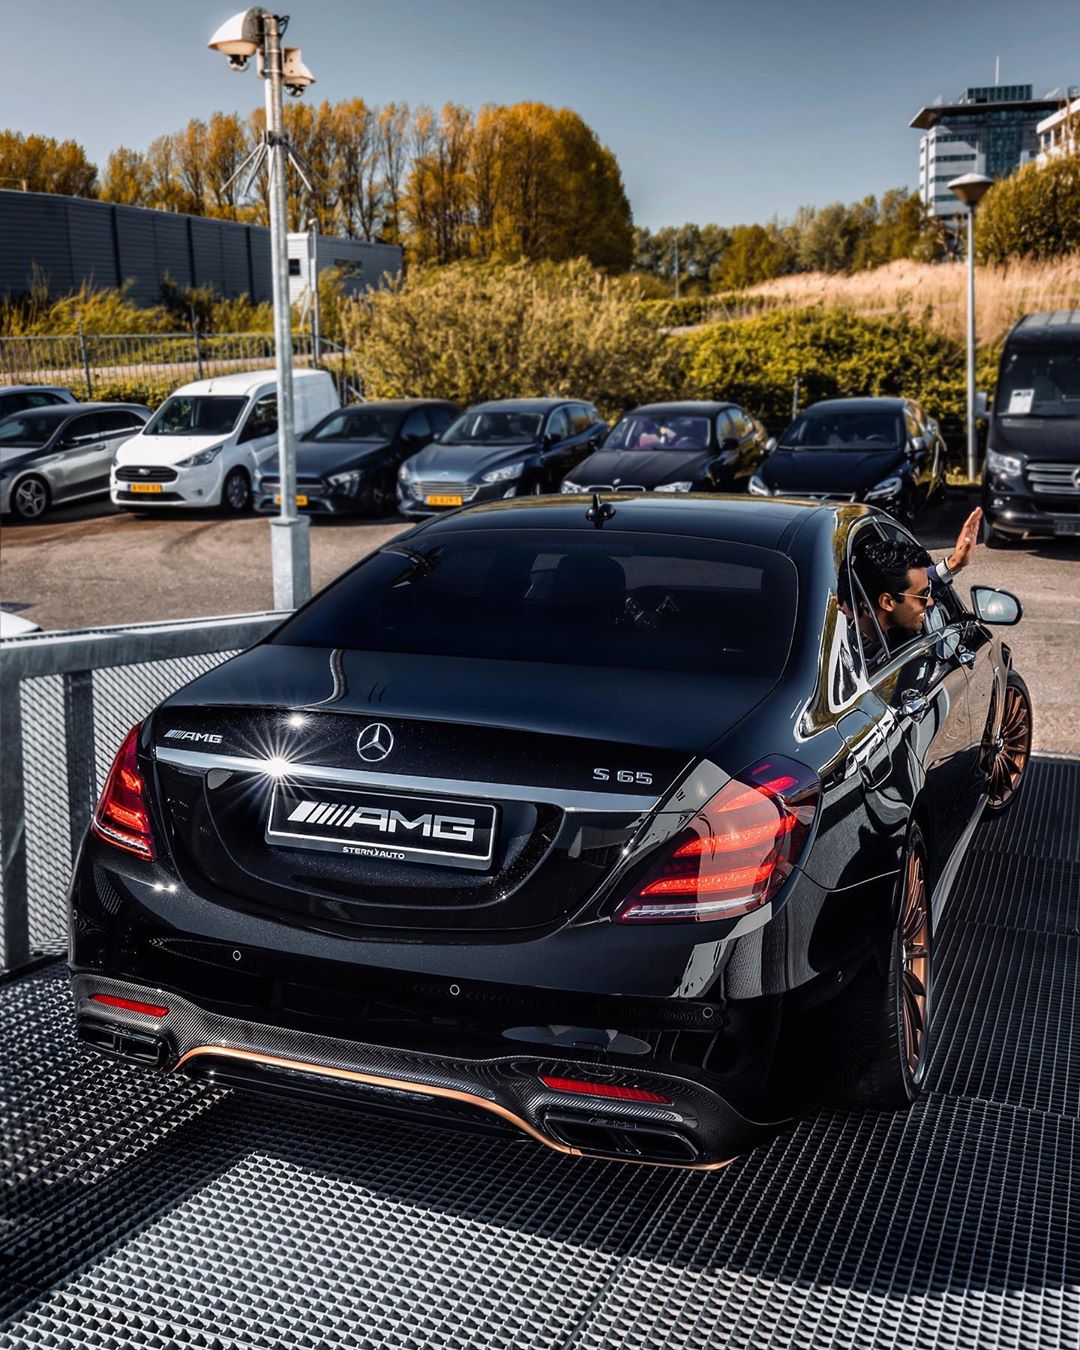 Mercedes-Benz Maybach on Twitter: "2020 S 65 AMG Final Edition V12 BITURBO  🍑 📸: @carvlogger #s65 #s65amg #s65finaledition https://t.co/o03COqSYZG" /  Twitter